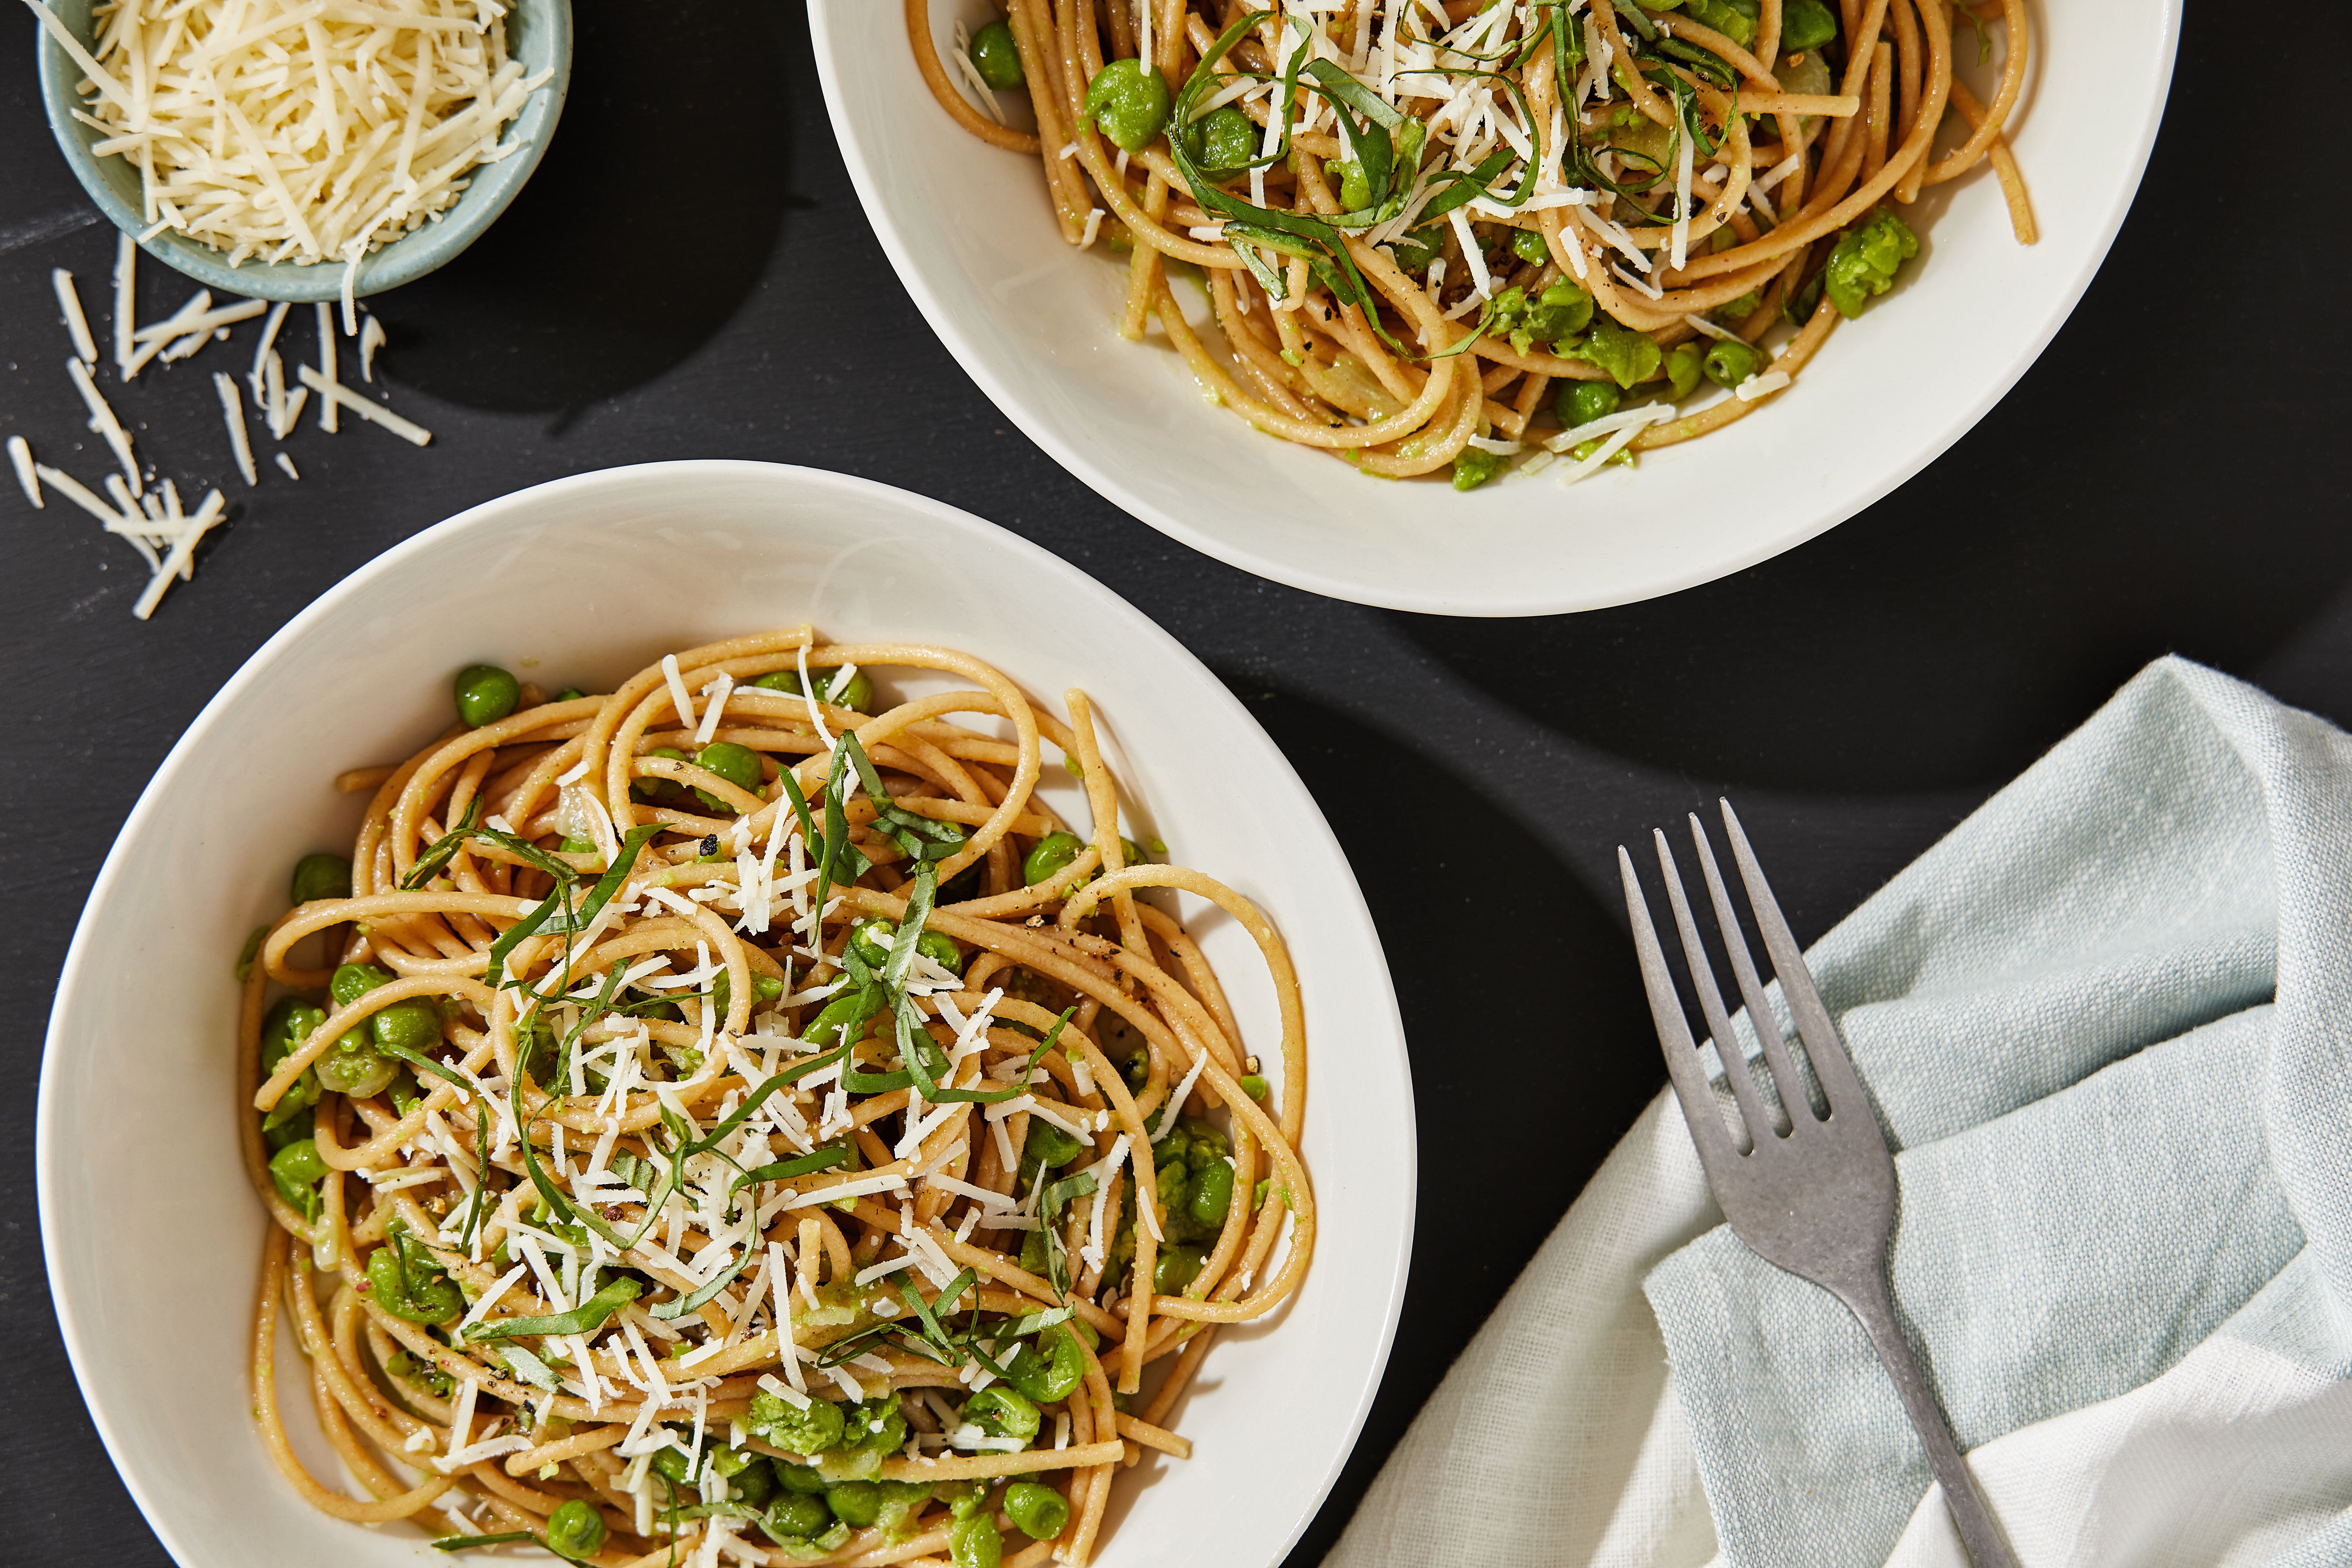 This light and fresh pasta dish is perfect for spring and summer